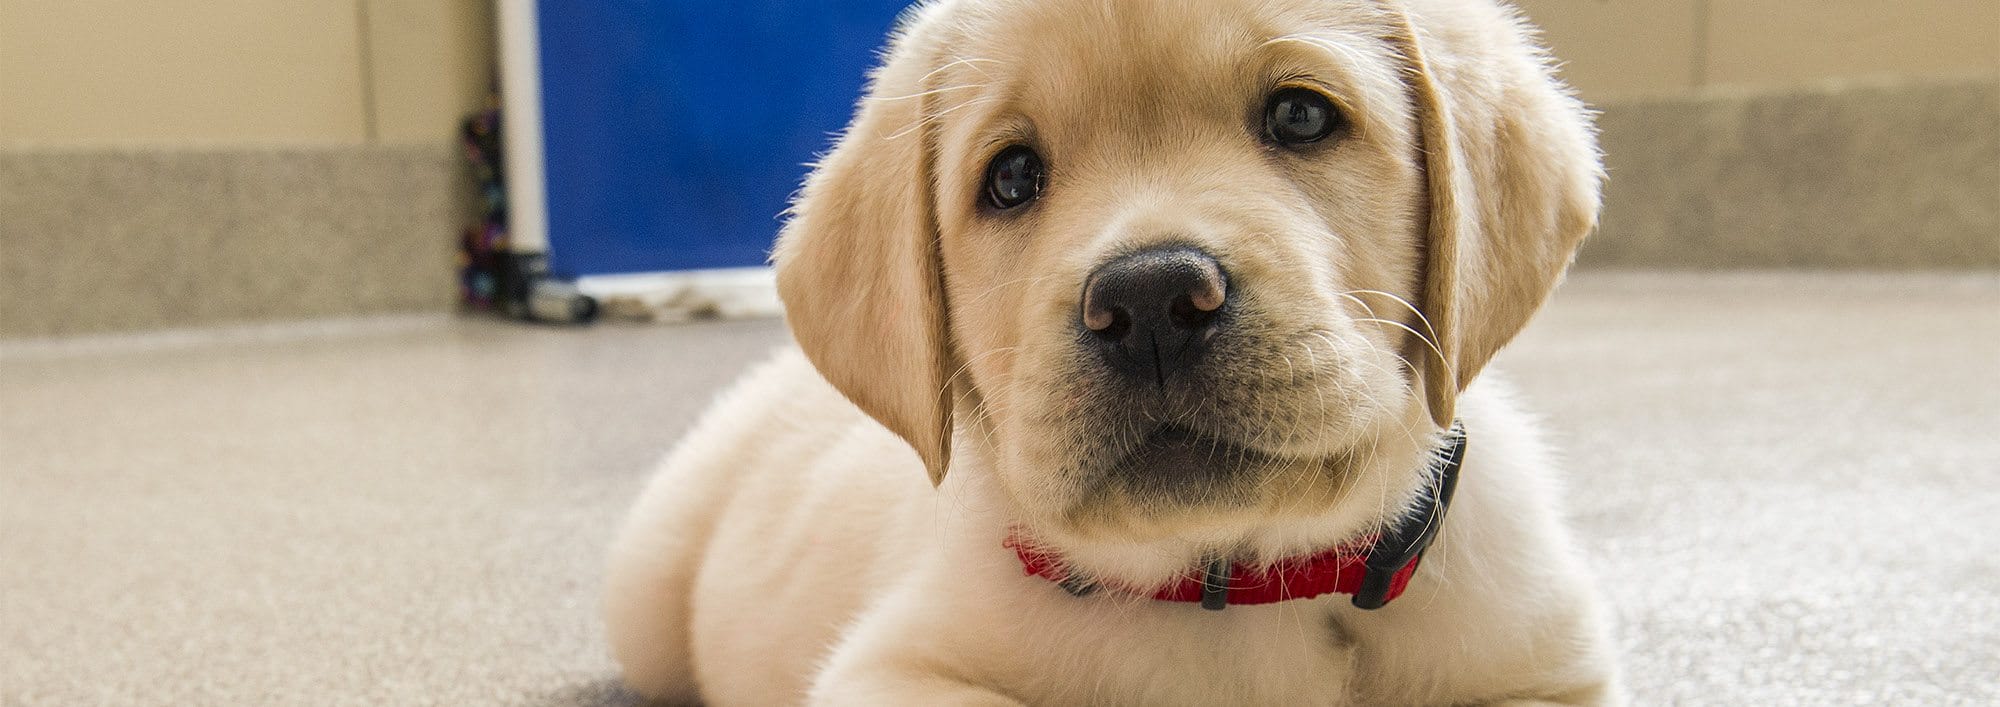 A yellow lab puppy lies on a floor with its face close to the camera